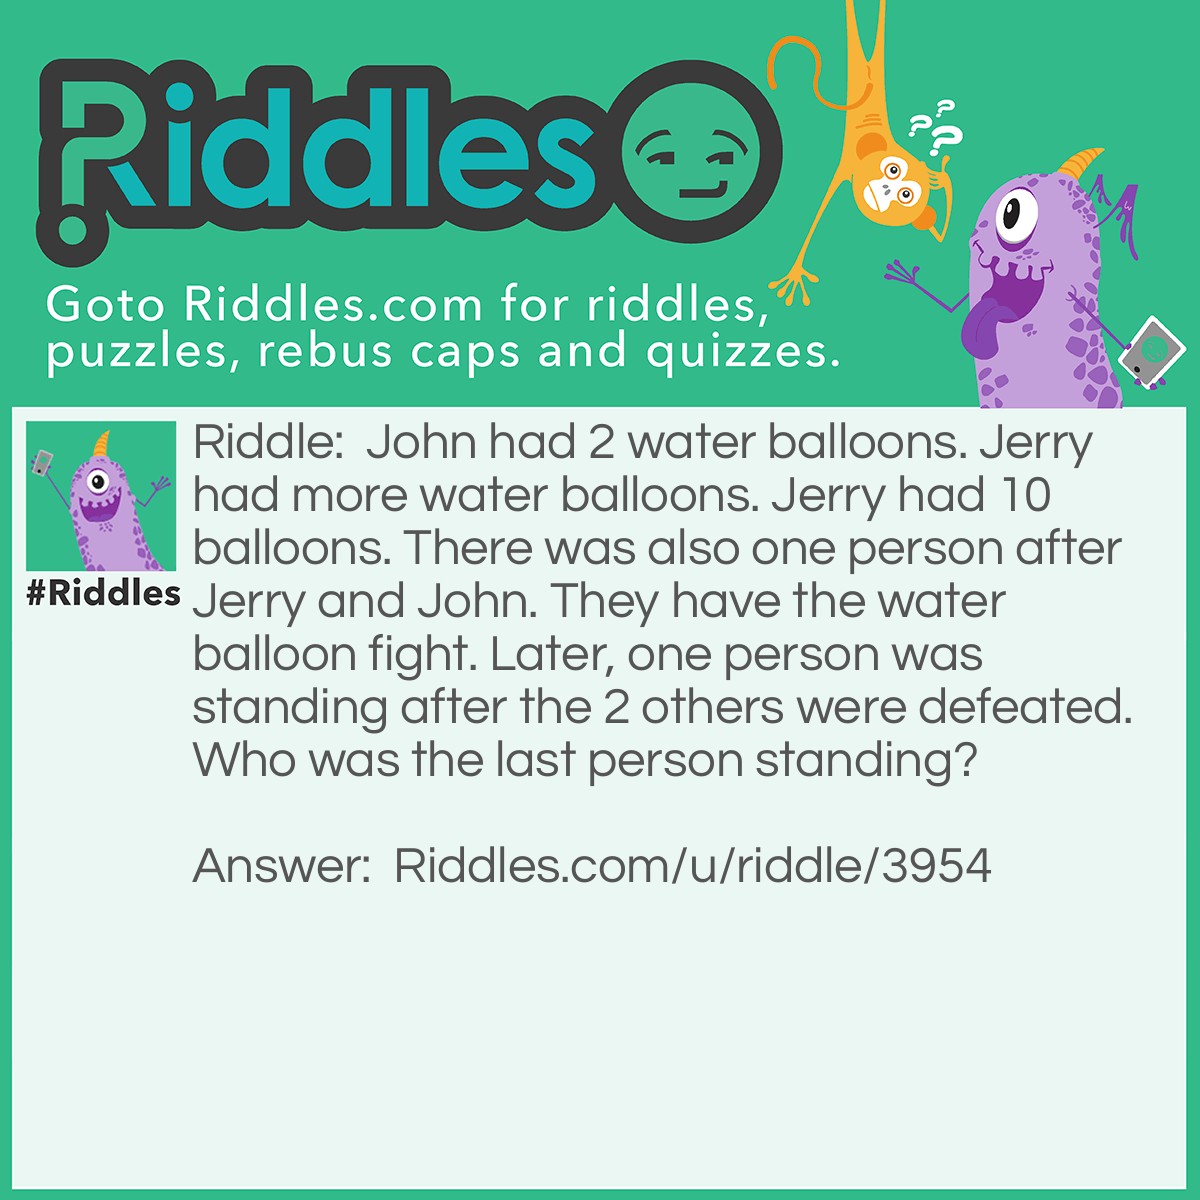 Riddle: John had 2 water balloons. Jerry had more water balloons. Jerry had 10 balloons. There was also one person after Jerry and John. They have the water balloon fight. Later, one person was standing after the 2 others were defeated. Who was the last person standing? Answer: The last person was...One Person!!!